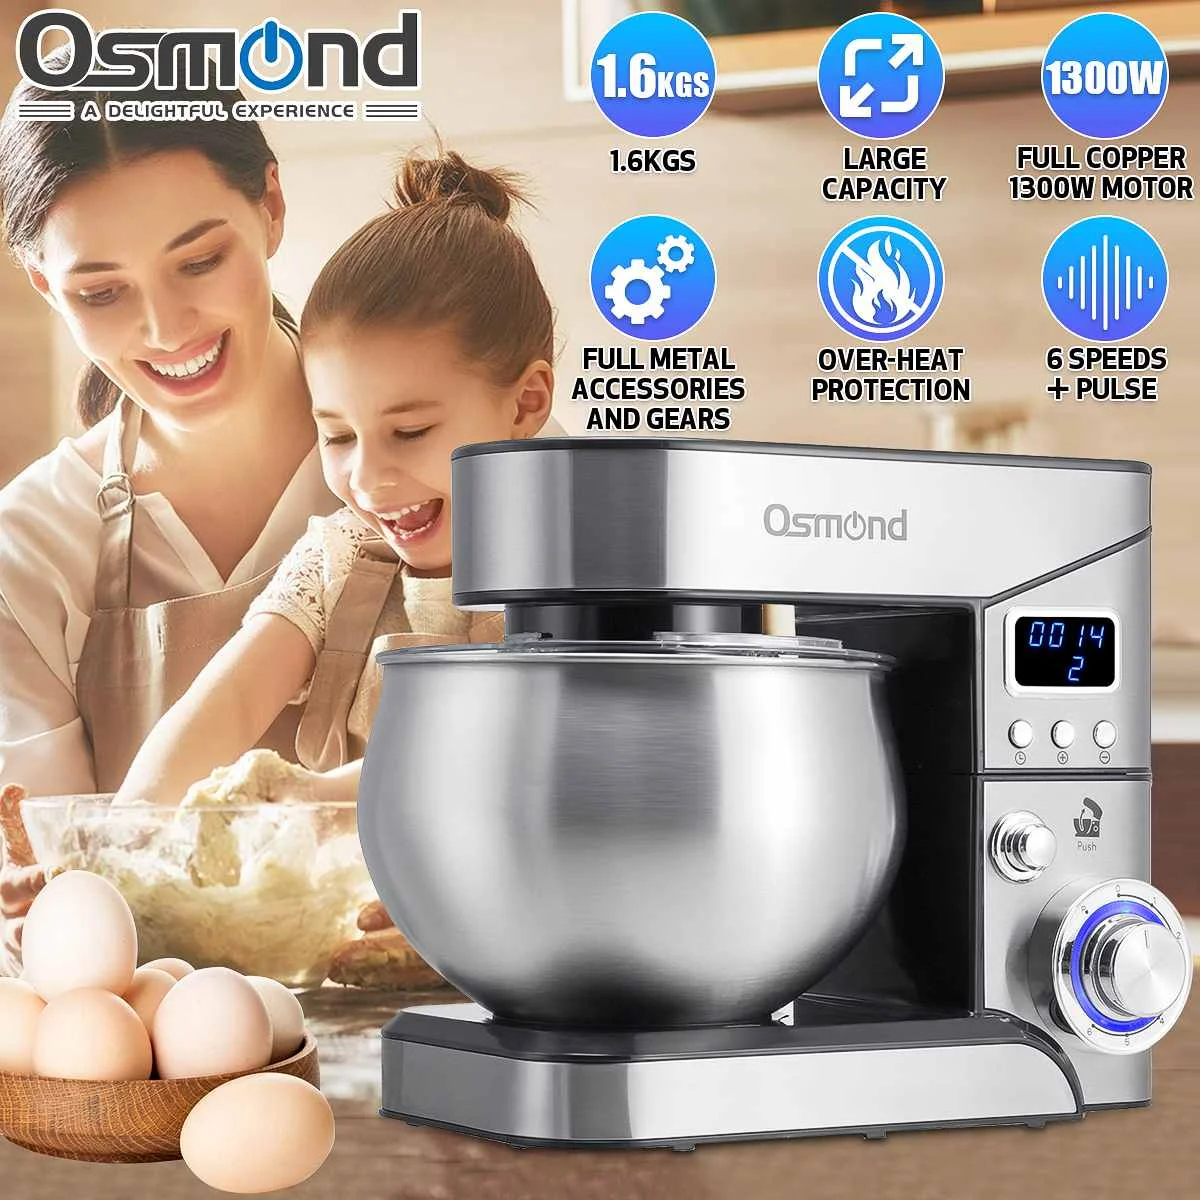 OSMOND 1300W LCD Professional Kitchen Food Stand Mixer 6 Speed